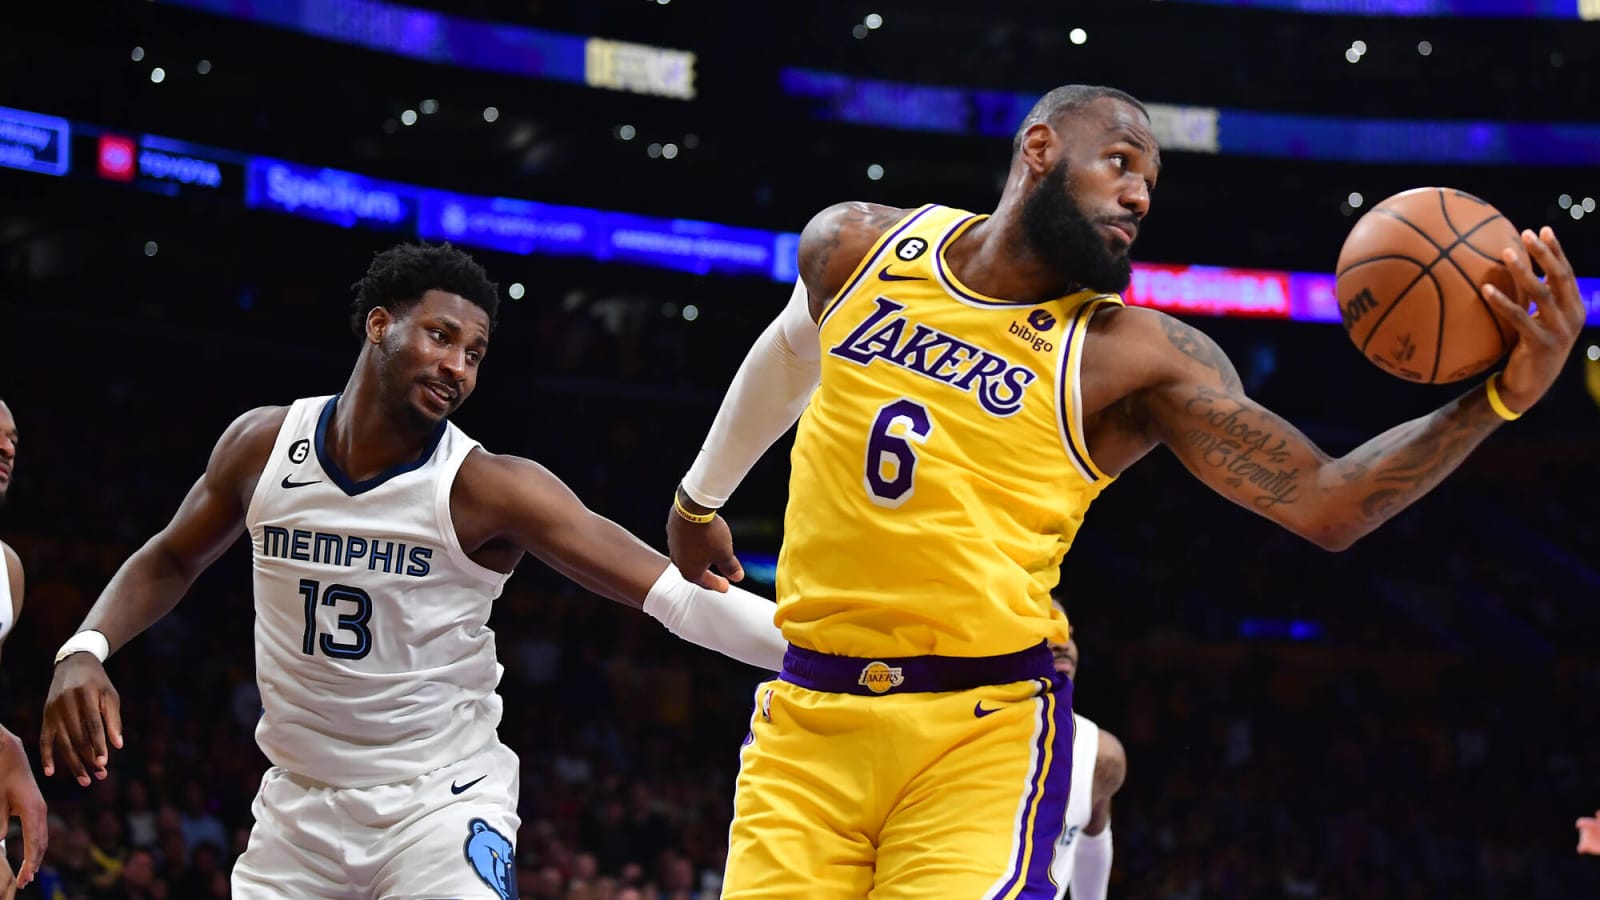 Los Angeles Lakers at Memphis Grizzlies Game 5 prediction, pick for 4/26: Can 'Old' LeBron get it done?